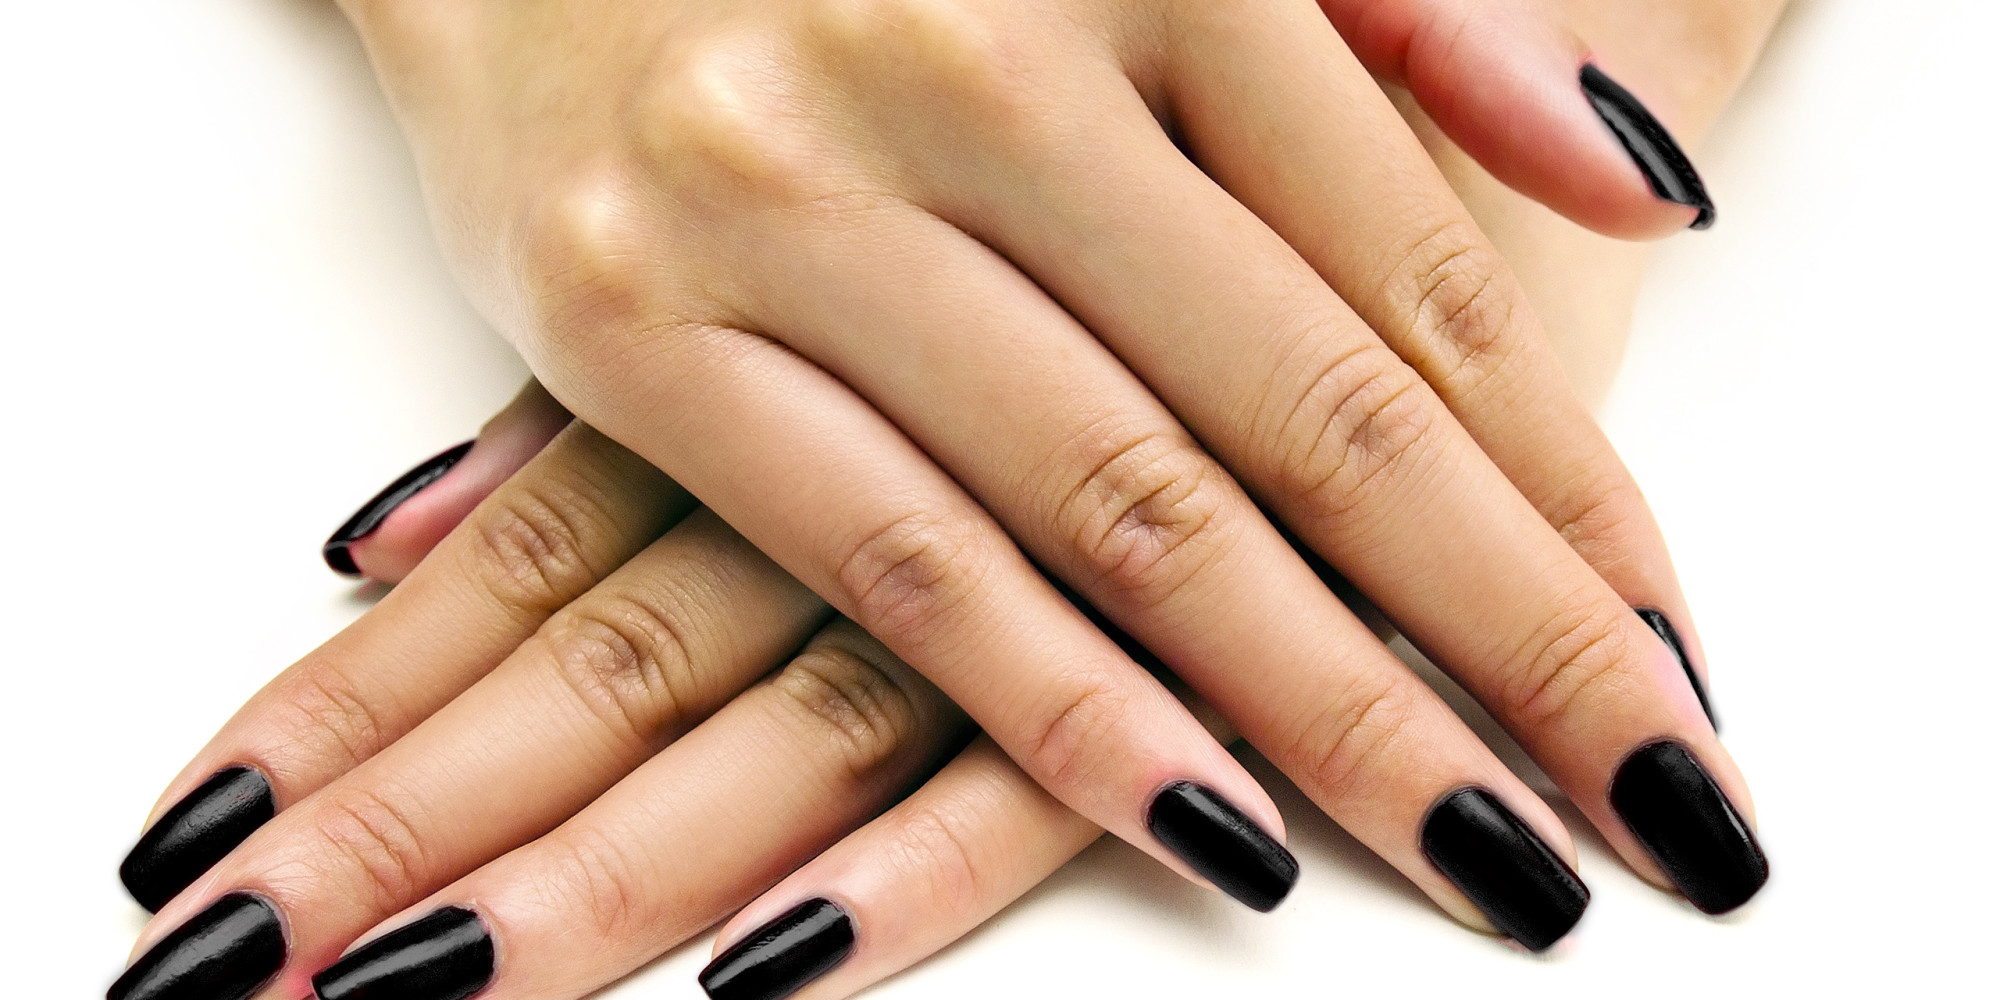 7. "Dark Nail Colors for February" - wide 4